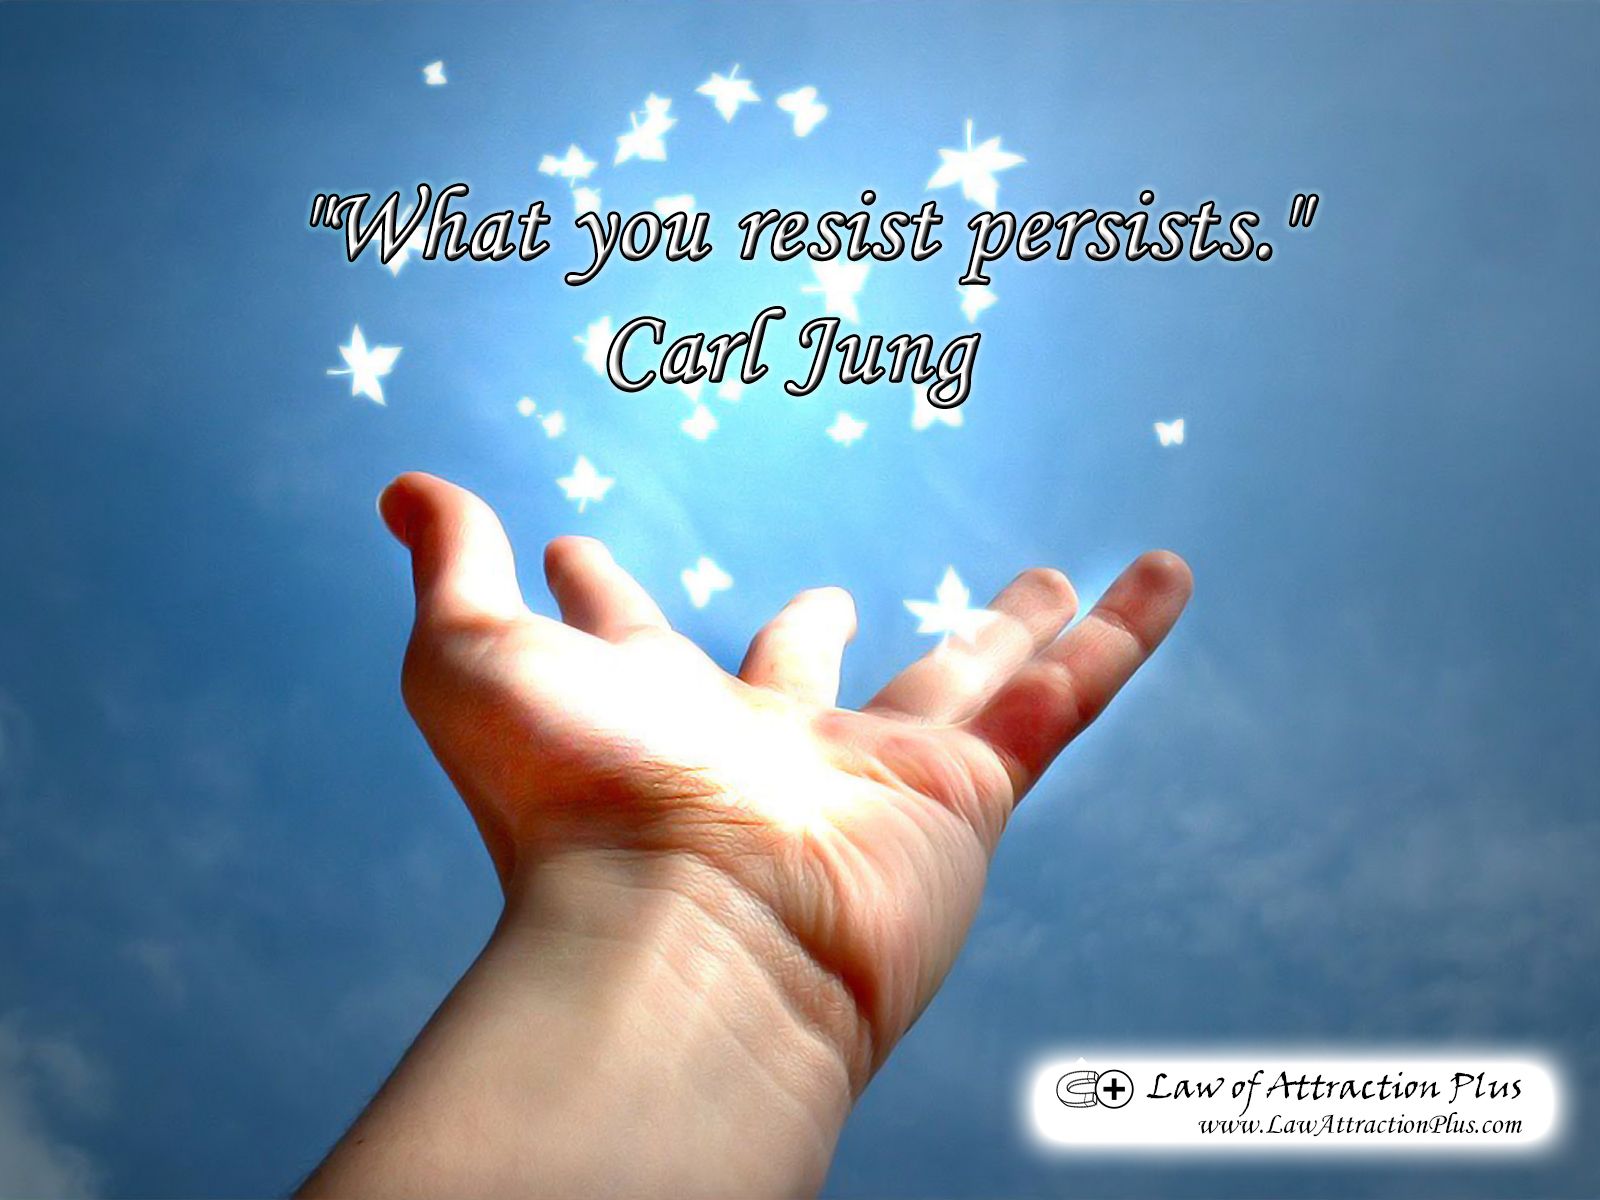 What you resist persists.